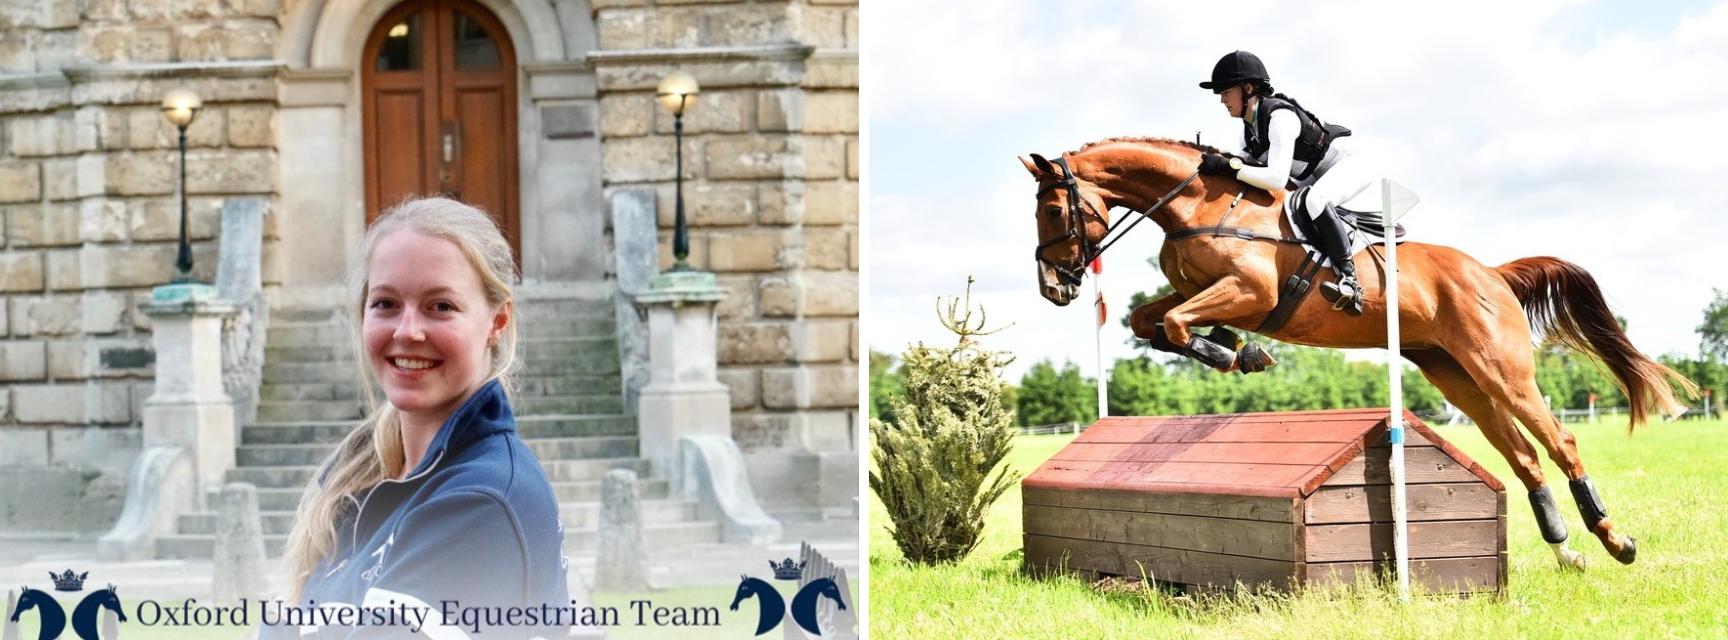 Performance Athlete Naomi Young. One profile image and one image of her riding a horse